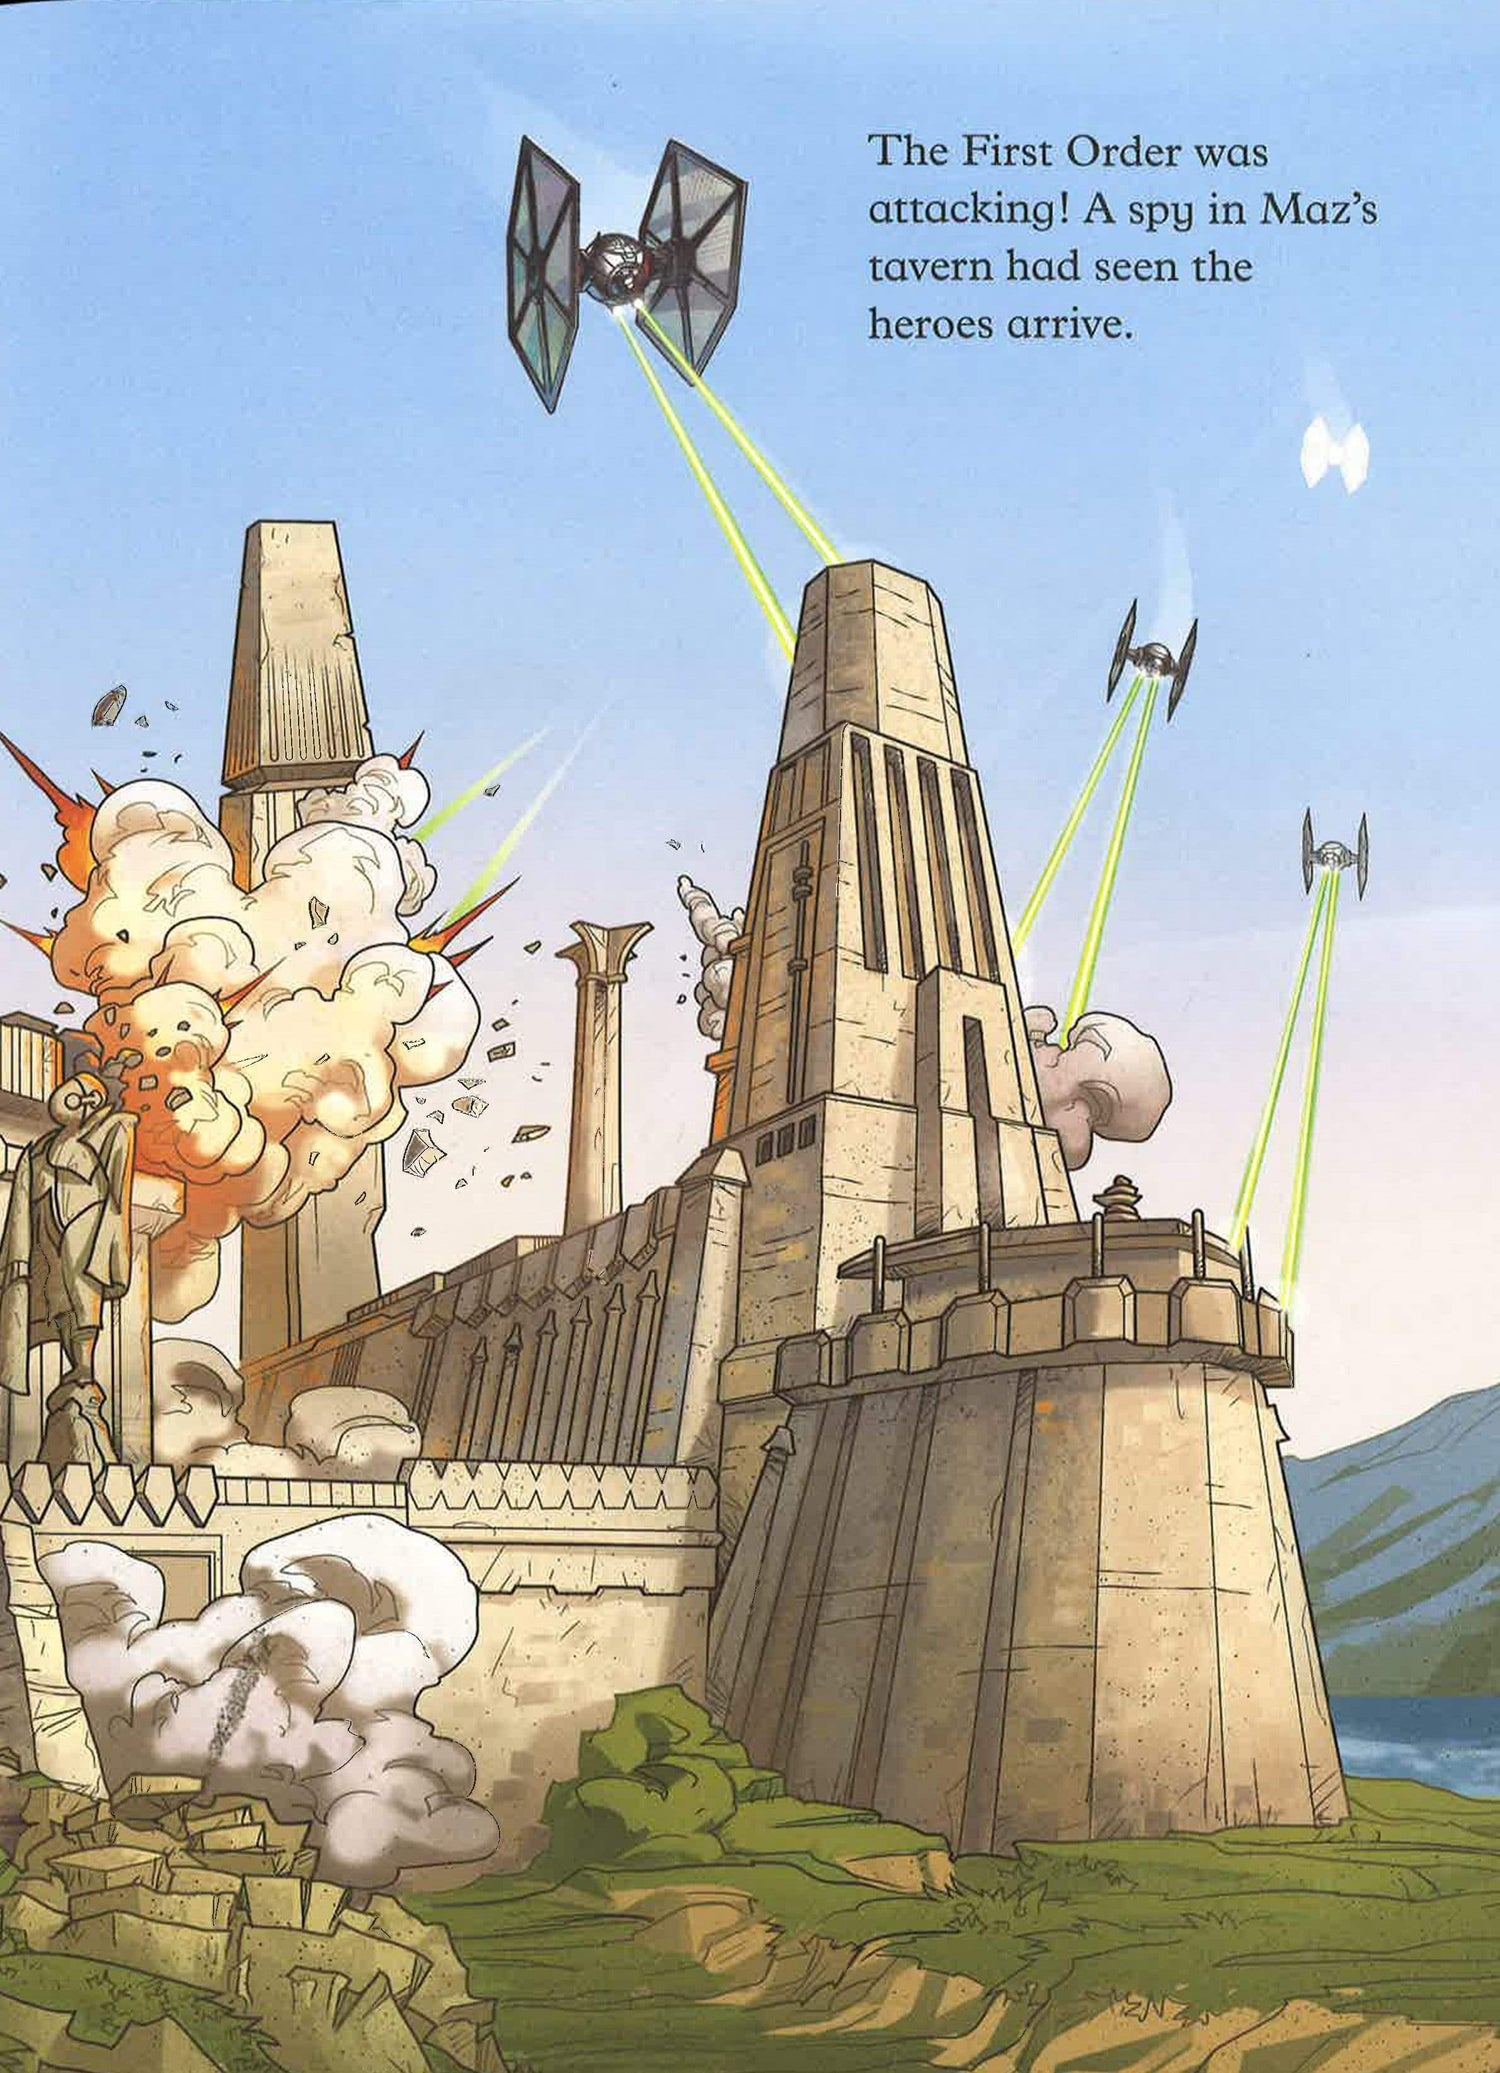 Star Wars: Chaos at the Castle Sticker Storybook